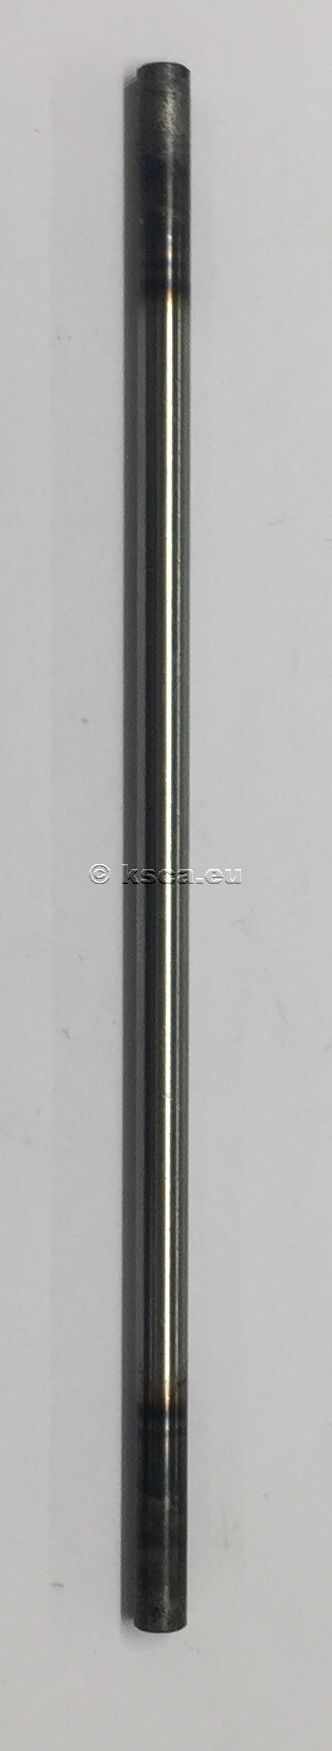 Picture of TM clutch rod lengh: 145mm